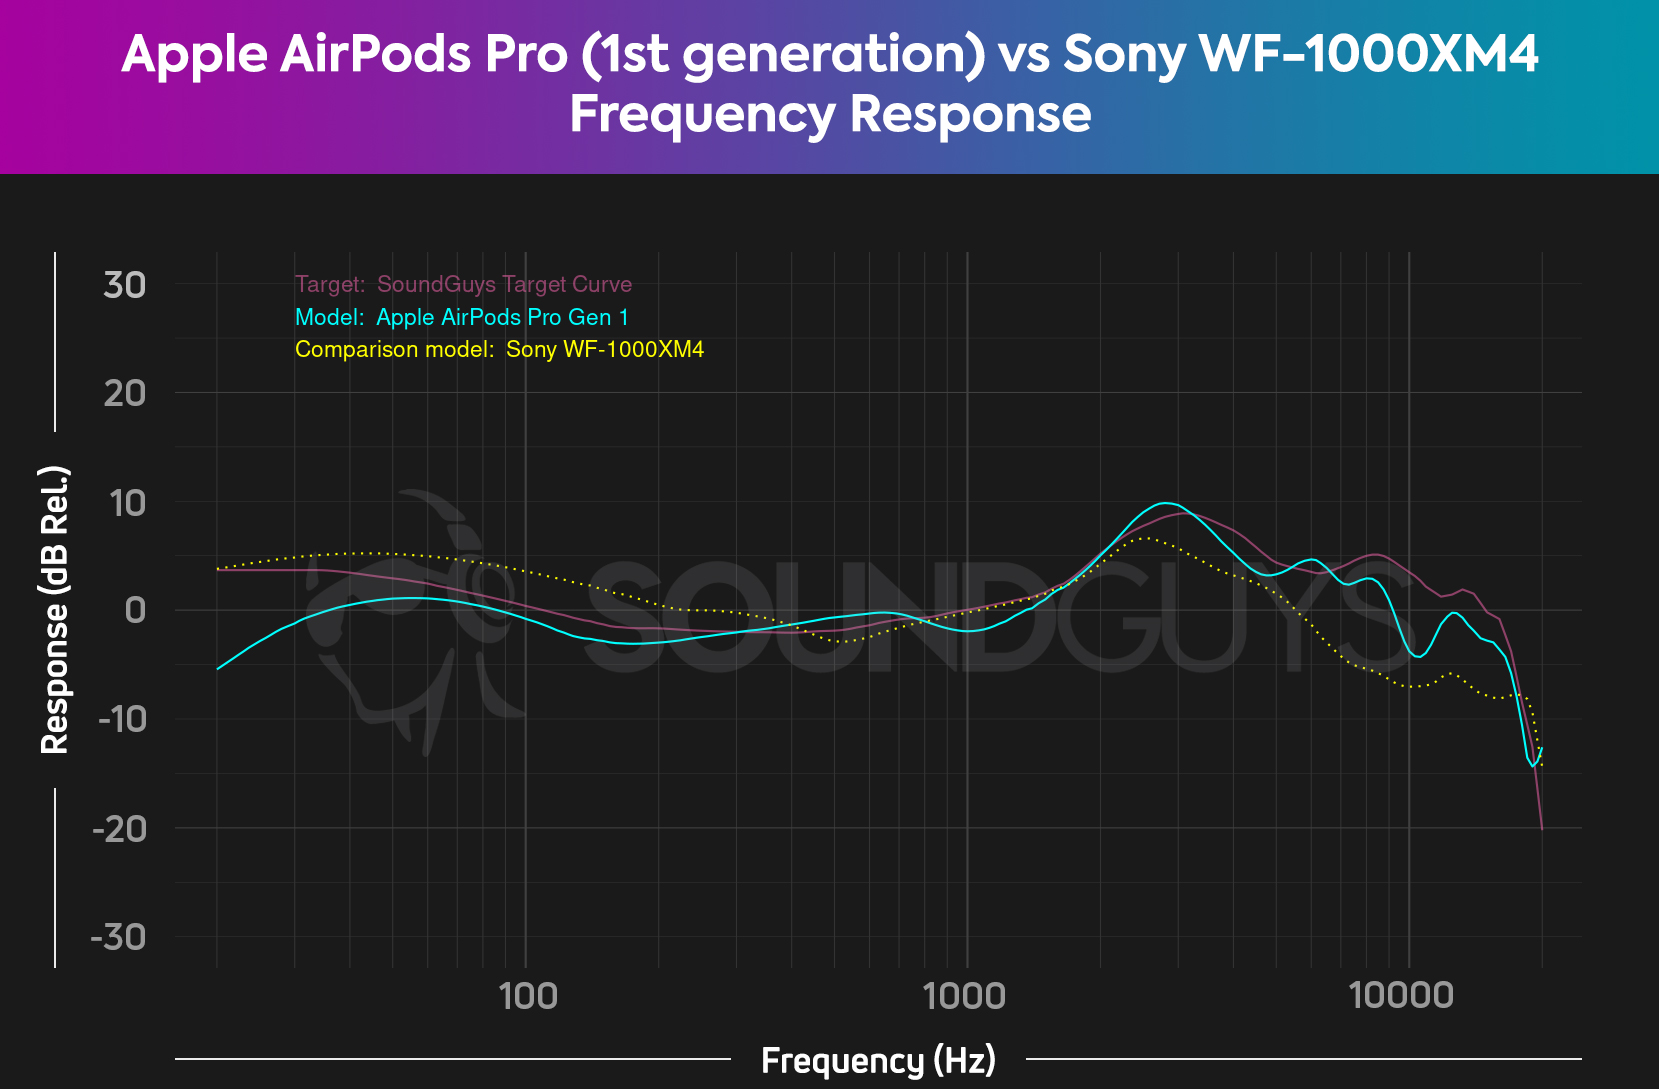 A chart compares the AirPods Pro 1 and Sony WF-1000XM4 frequency responses.